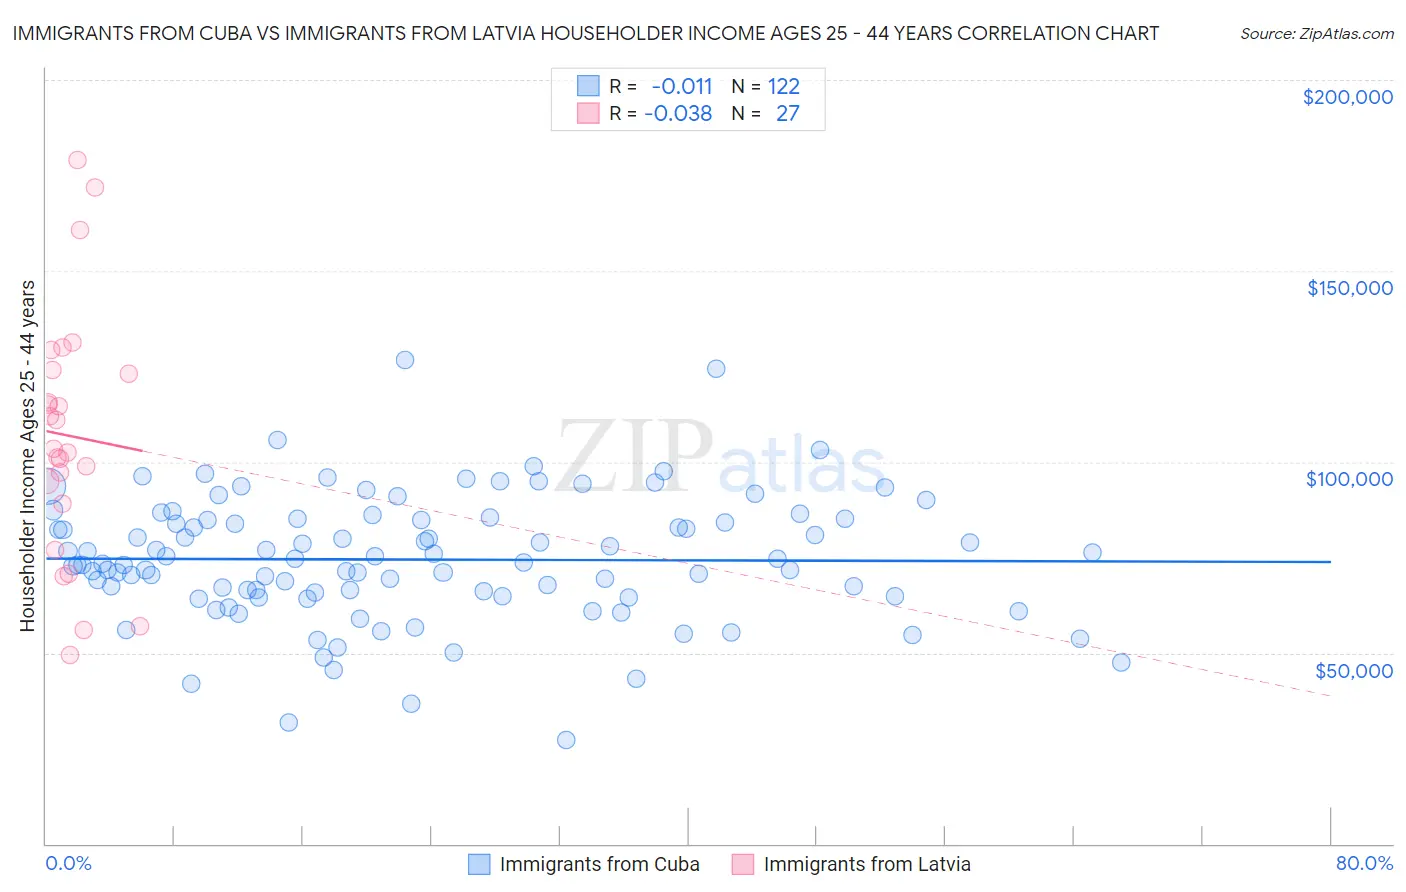 Immigrants from Cuba vs Immigrants from Latvia Householder Income Ages 25 - 44 years